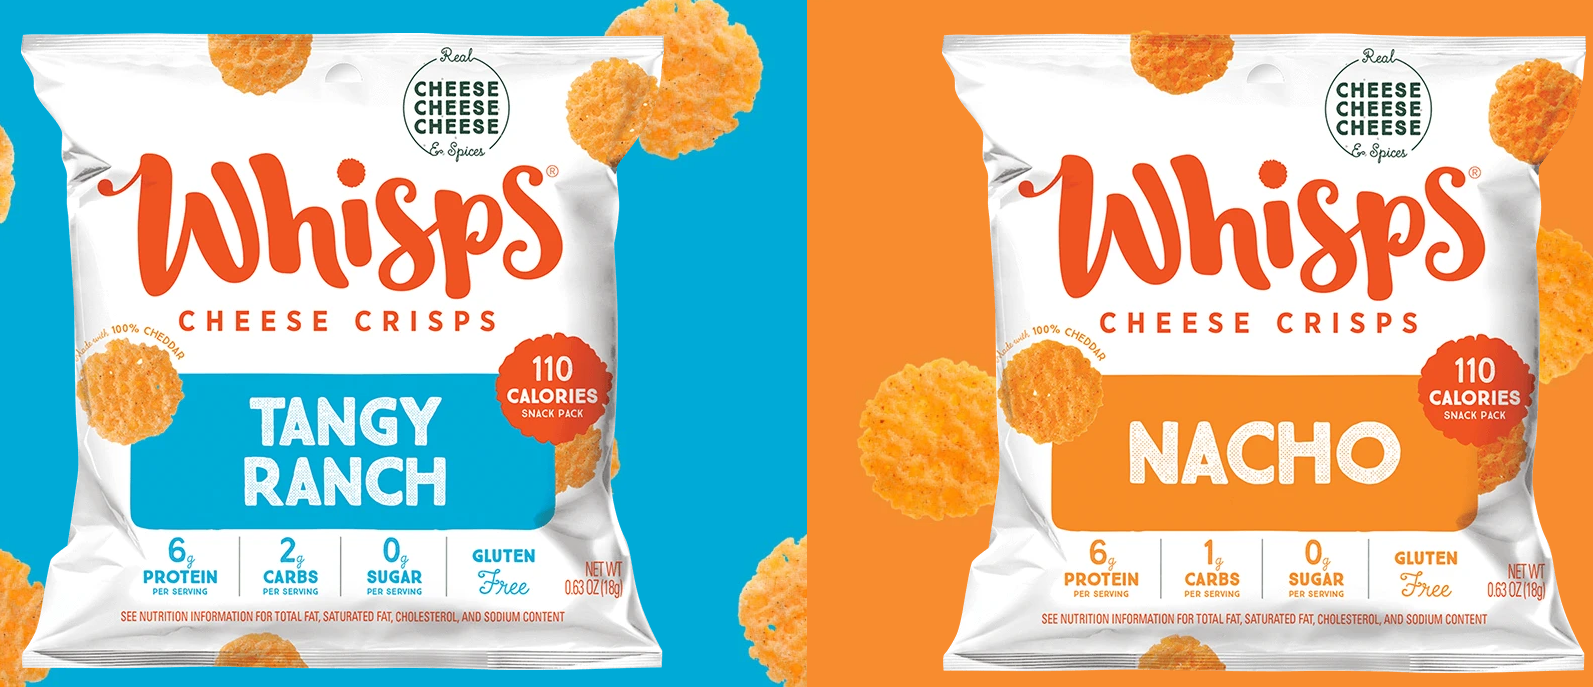 Whisps Cheese Snacks 2 FREE Samples! GO NOW